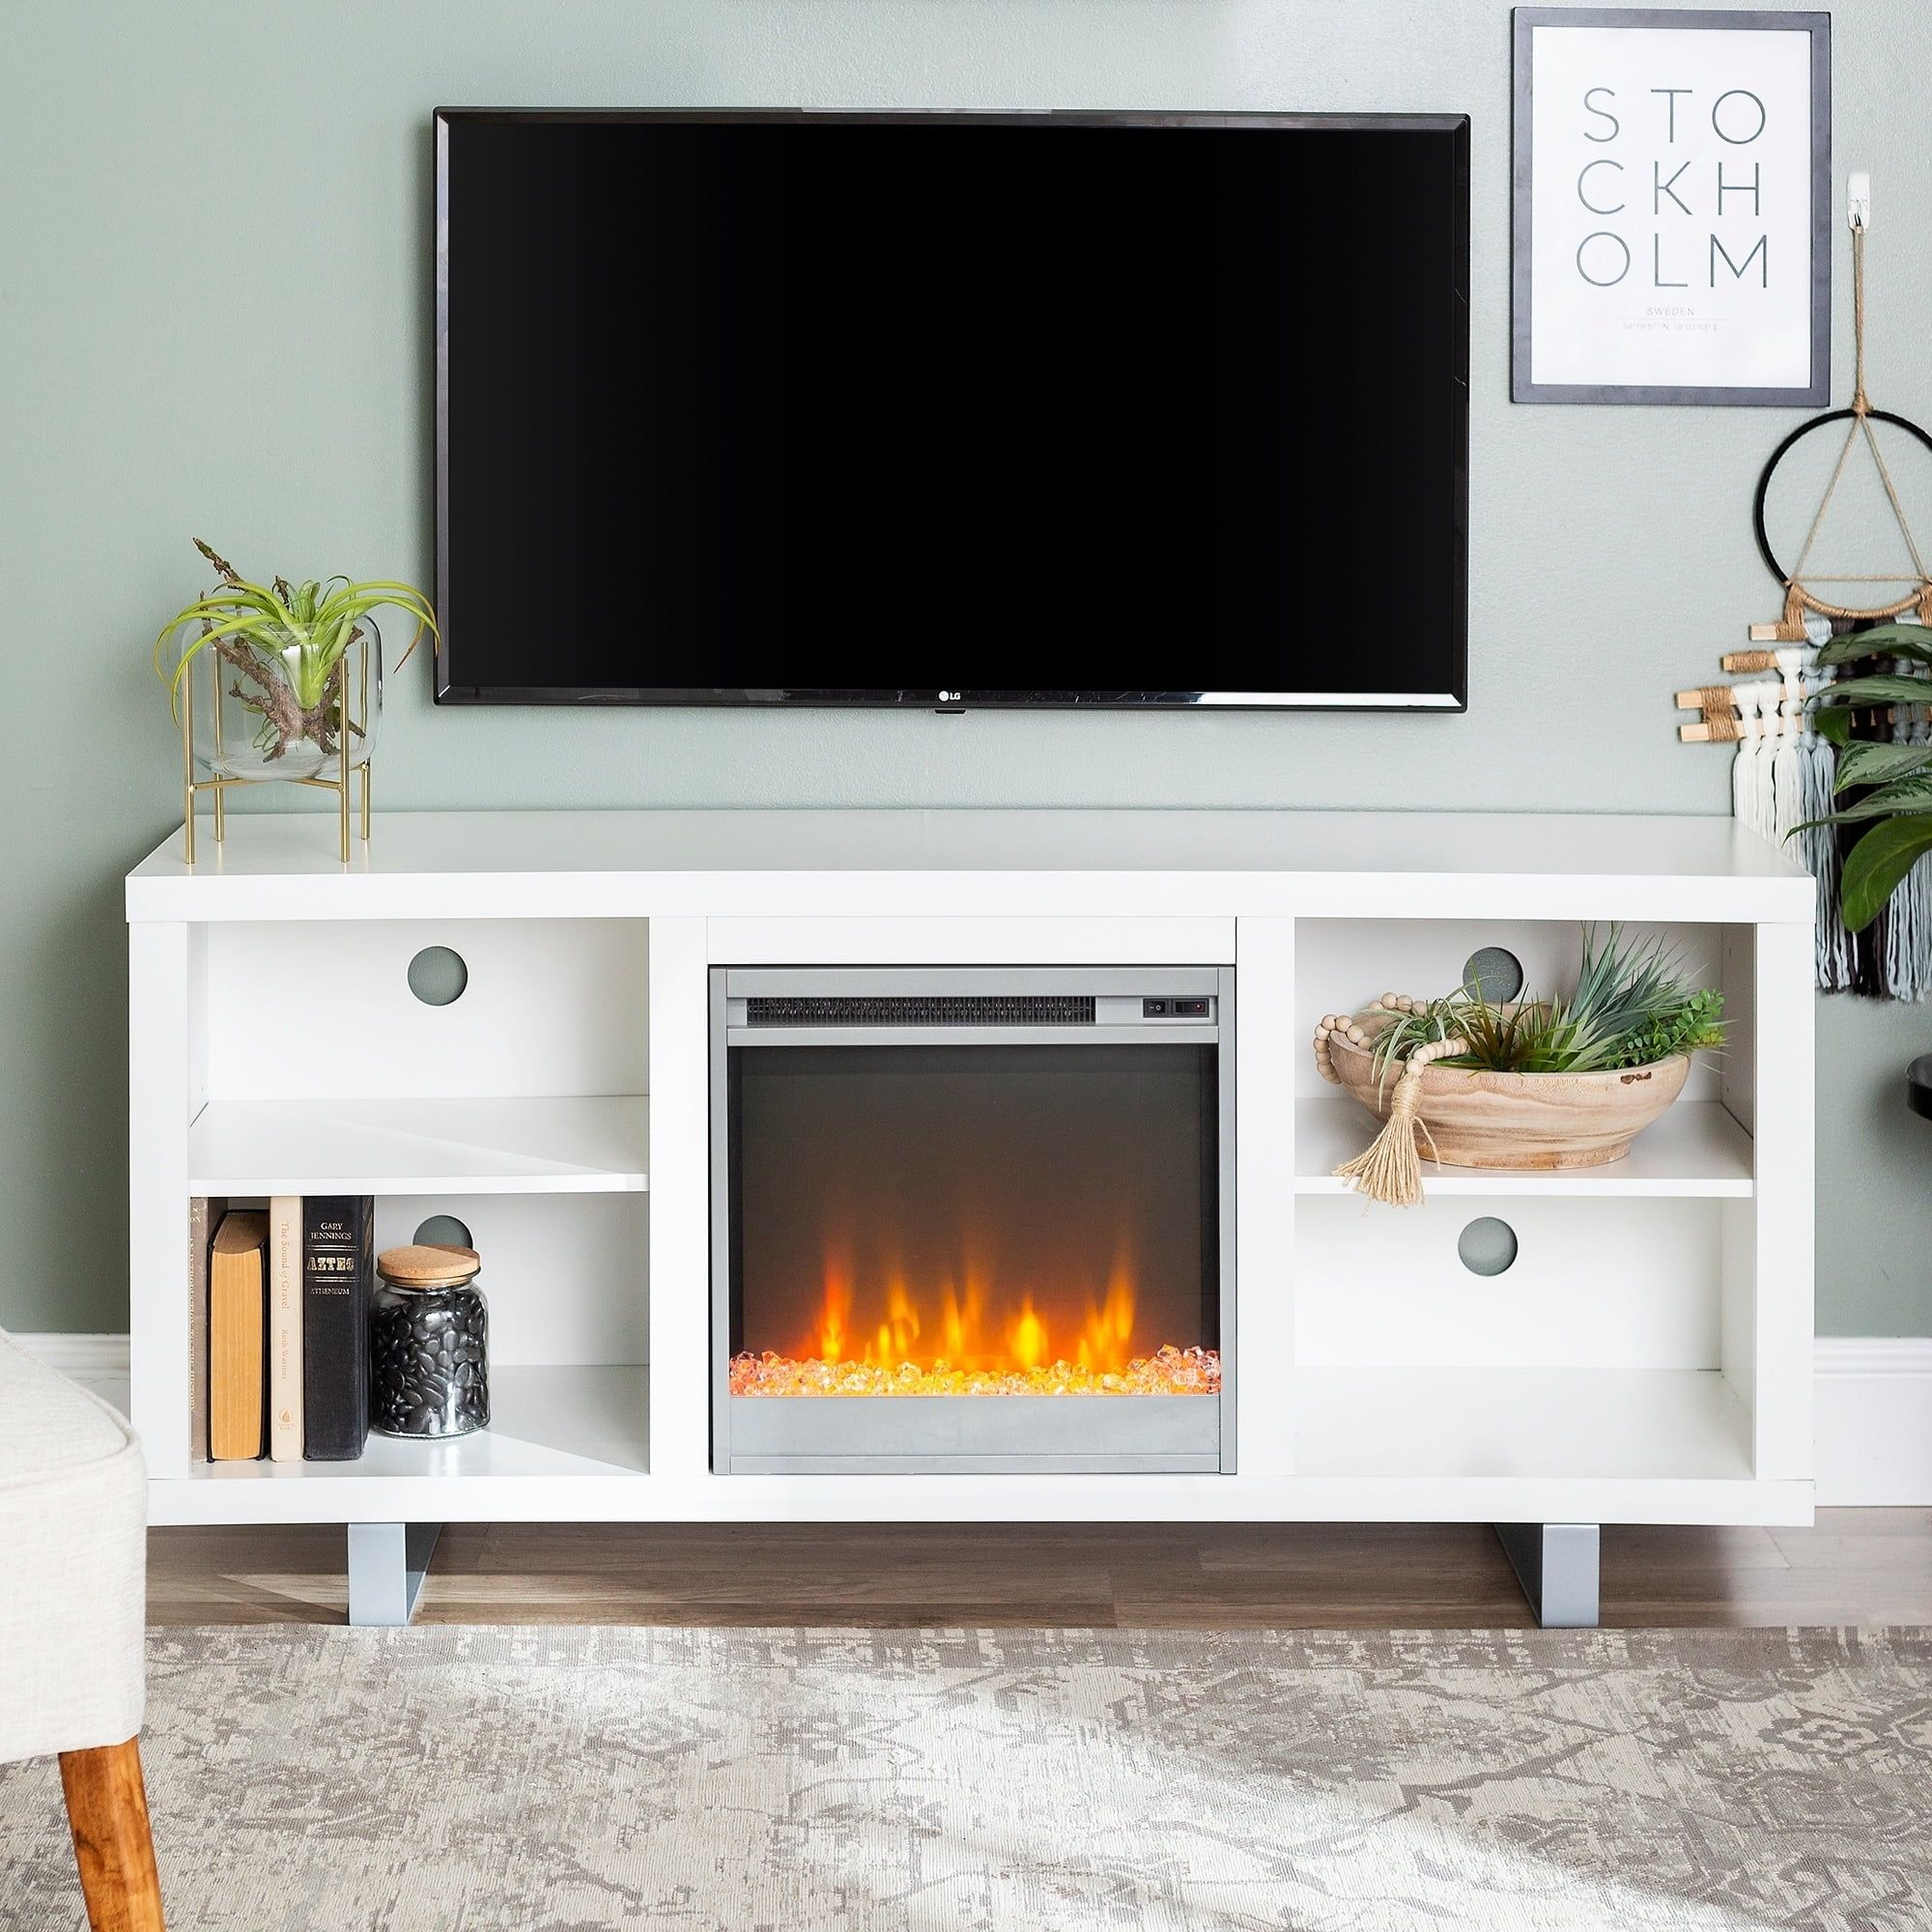 Middlebrook Designs 58 Inch Modern Fireplace Tv Stand Console With Open Throughout Modern Fireplace Tv Stands (View 3 of 20)